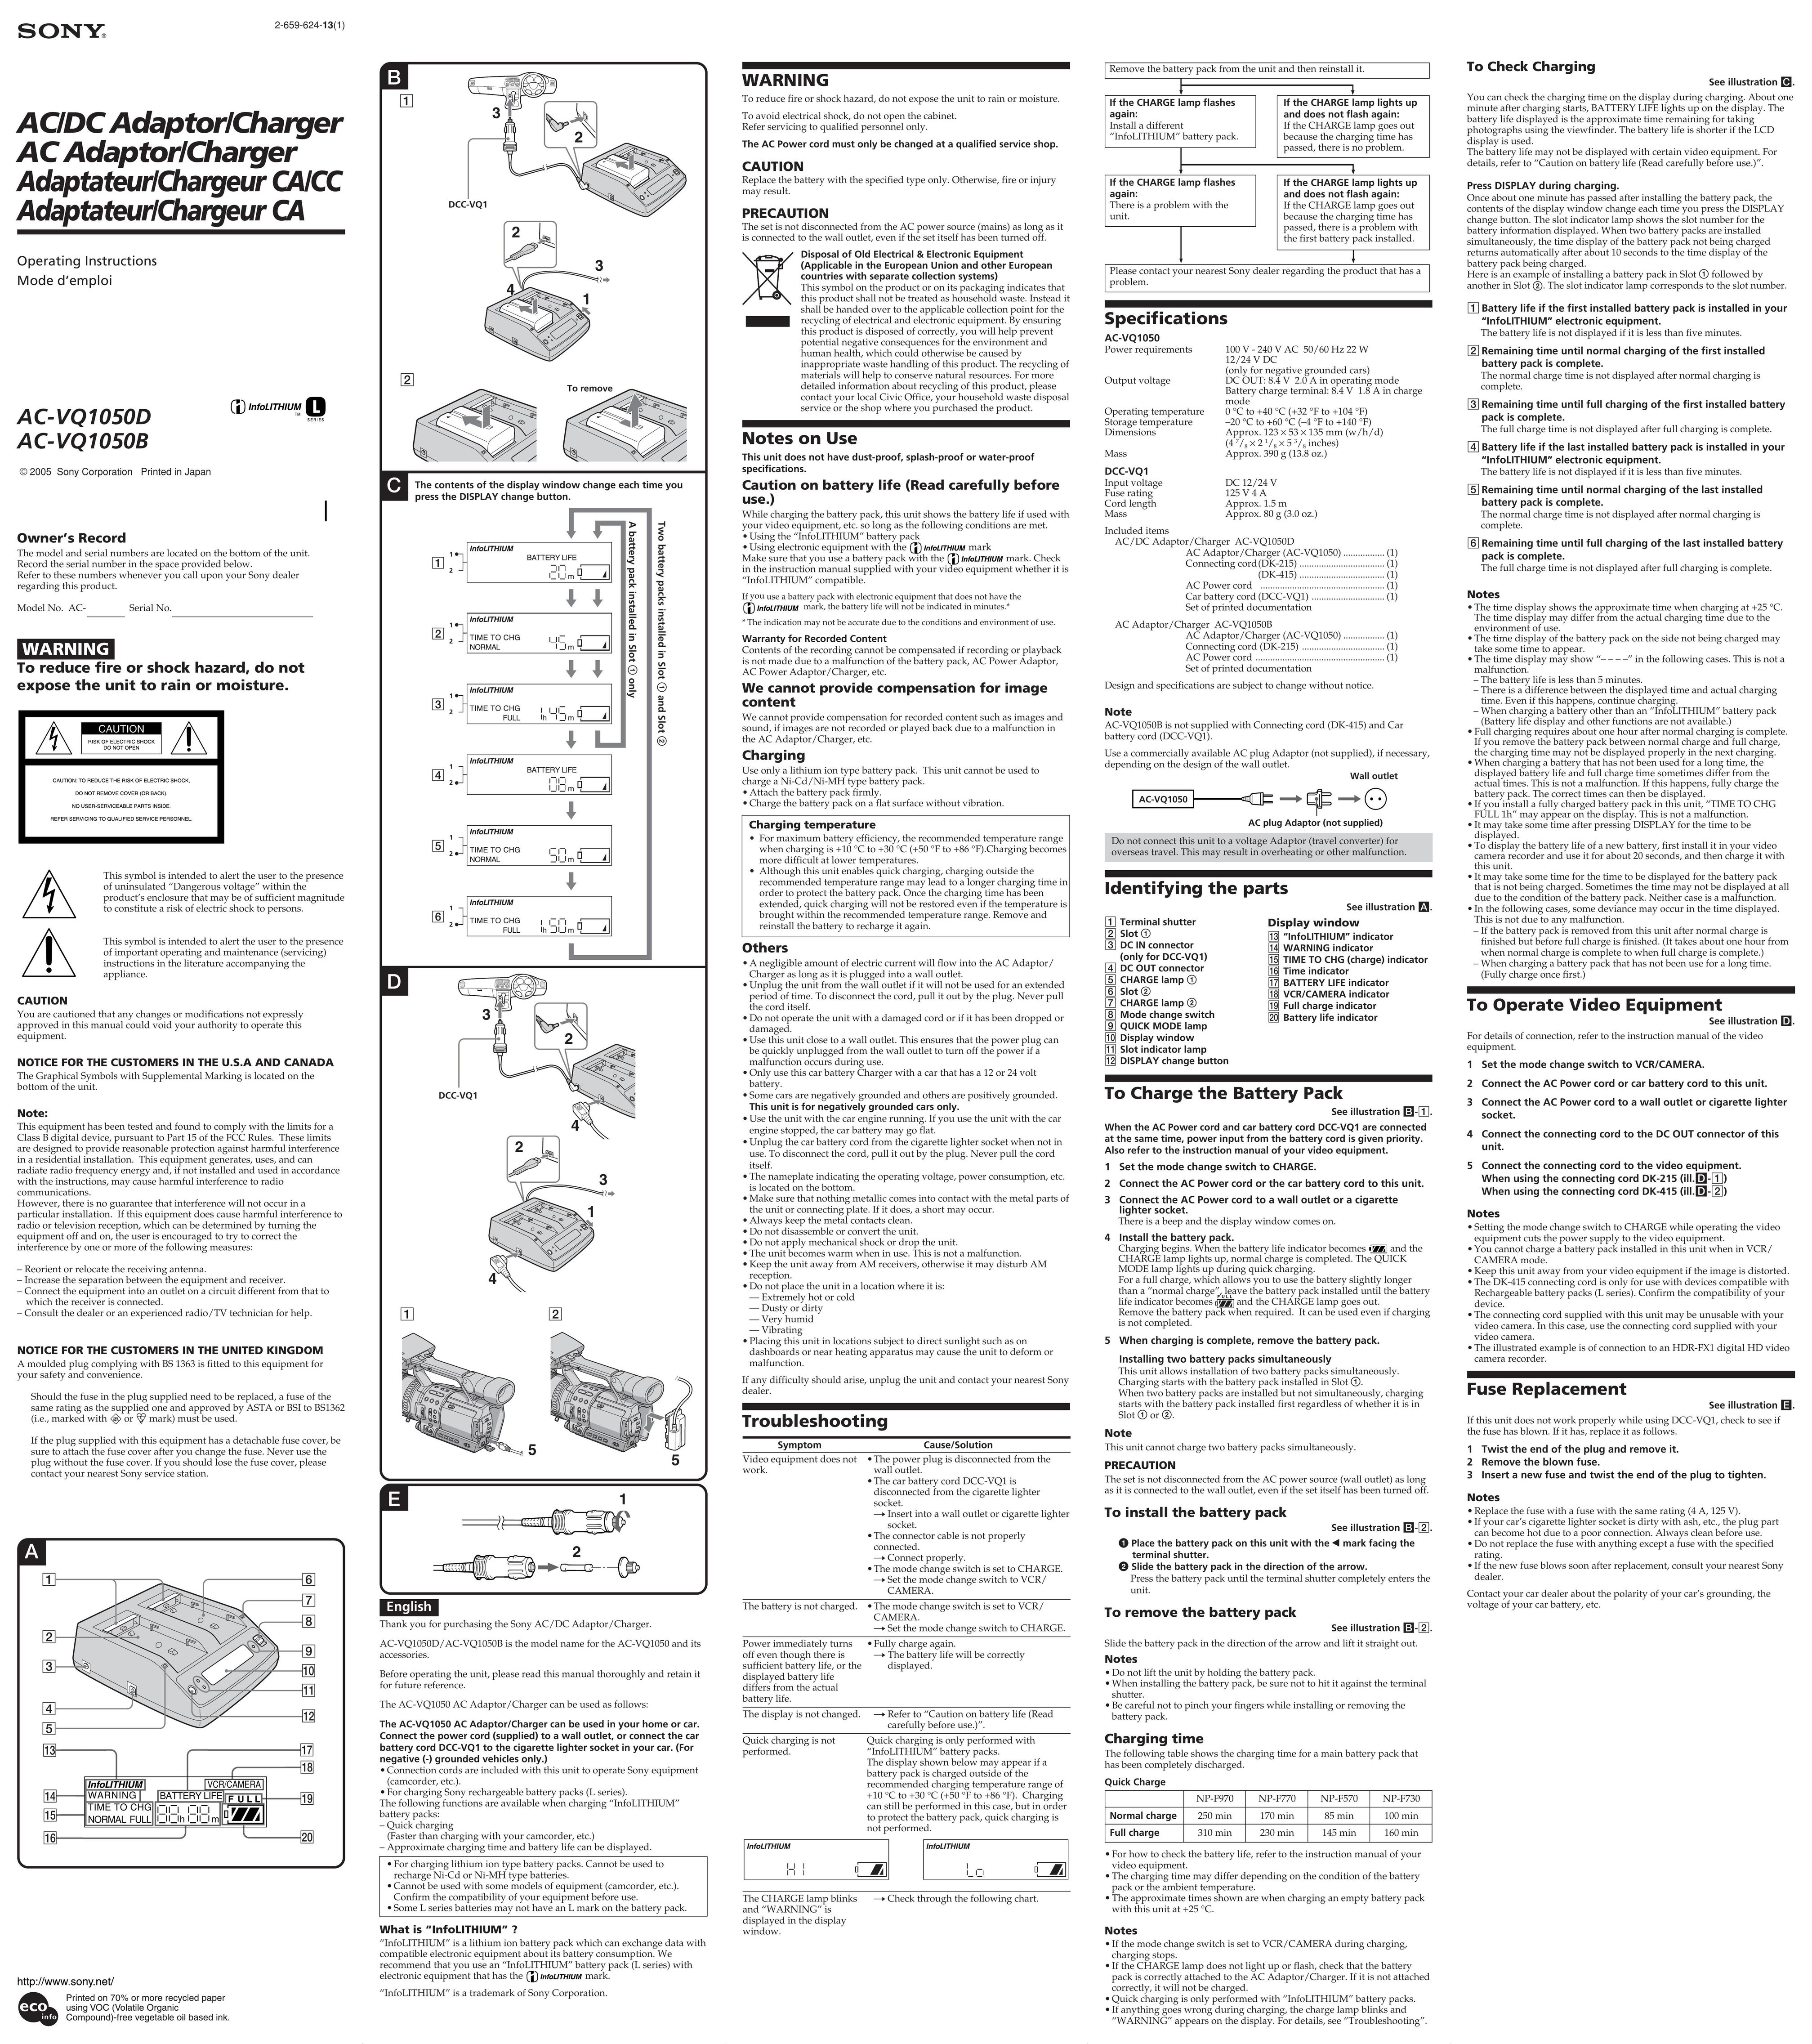 Sony AC-VQ1050D Battery Charger User Manual